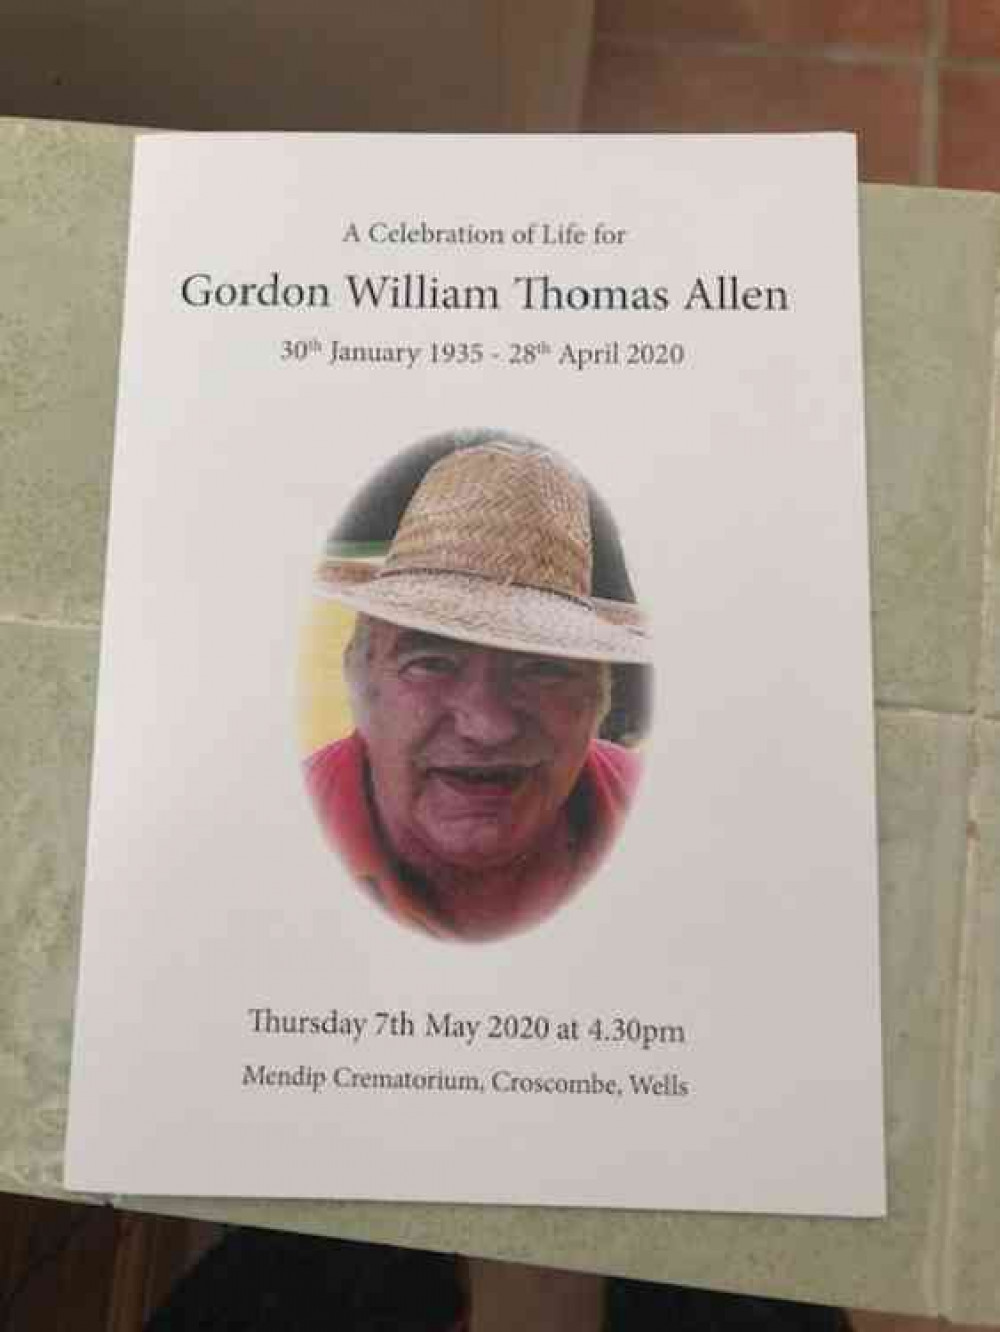 Gordon Allen taught at St Dunstan's for 17 years